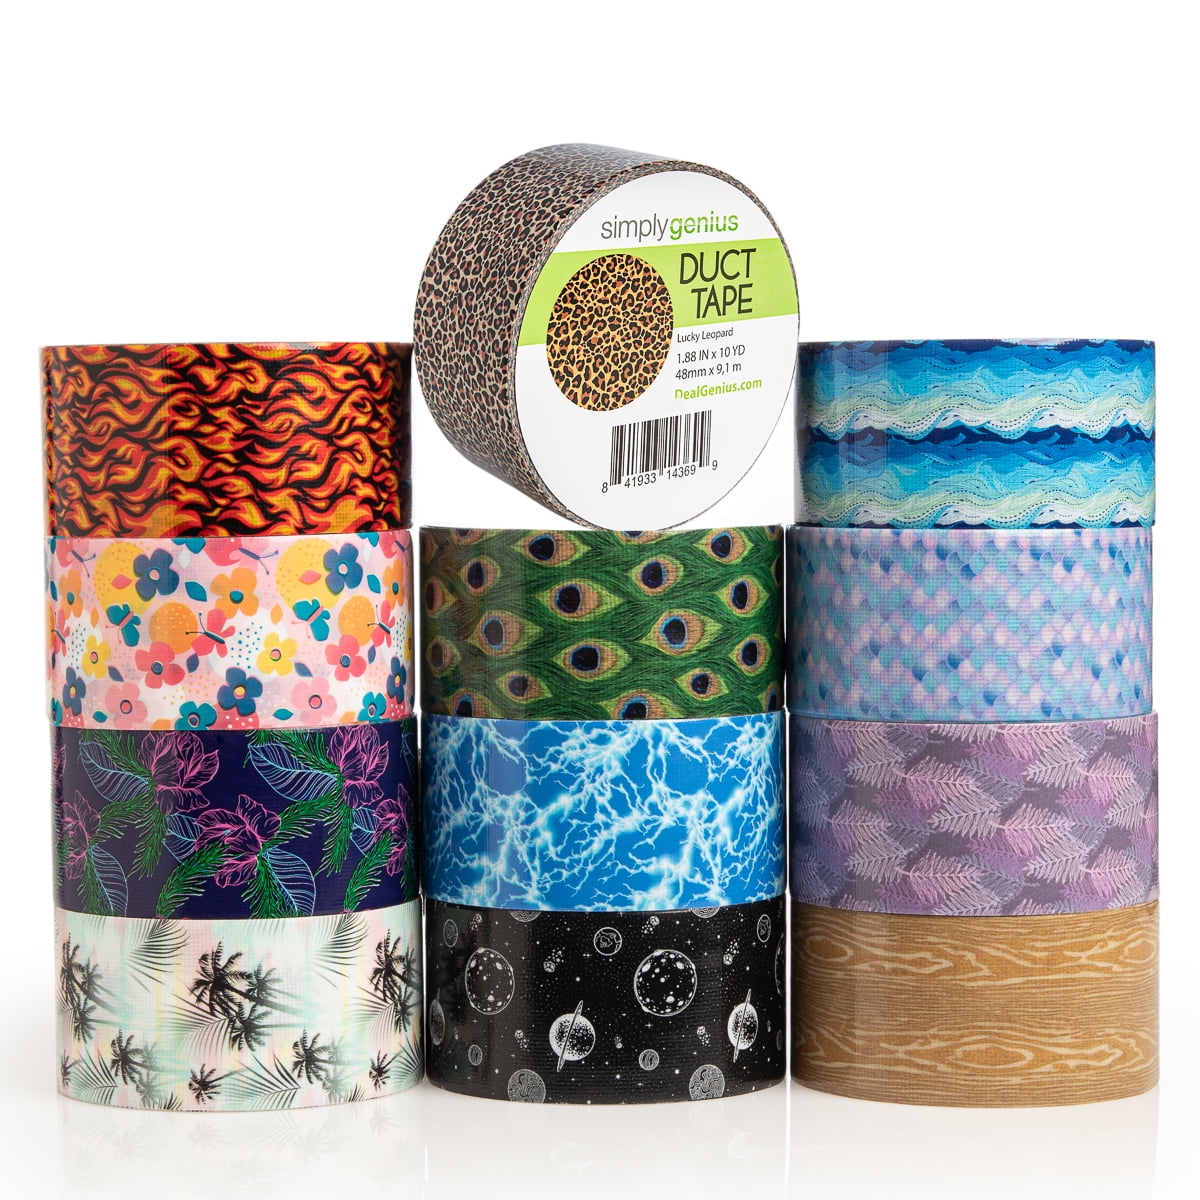 GIFTEXPRESS 12 Assorted Colored Duct Tapes 10 Yards x 2 Inch Rolls,12 Multi  Purposes Bright Colors Tapes Great for DIY Art Kit Home School, Colors